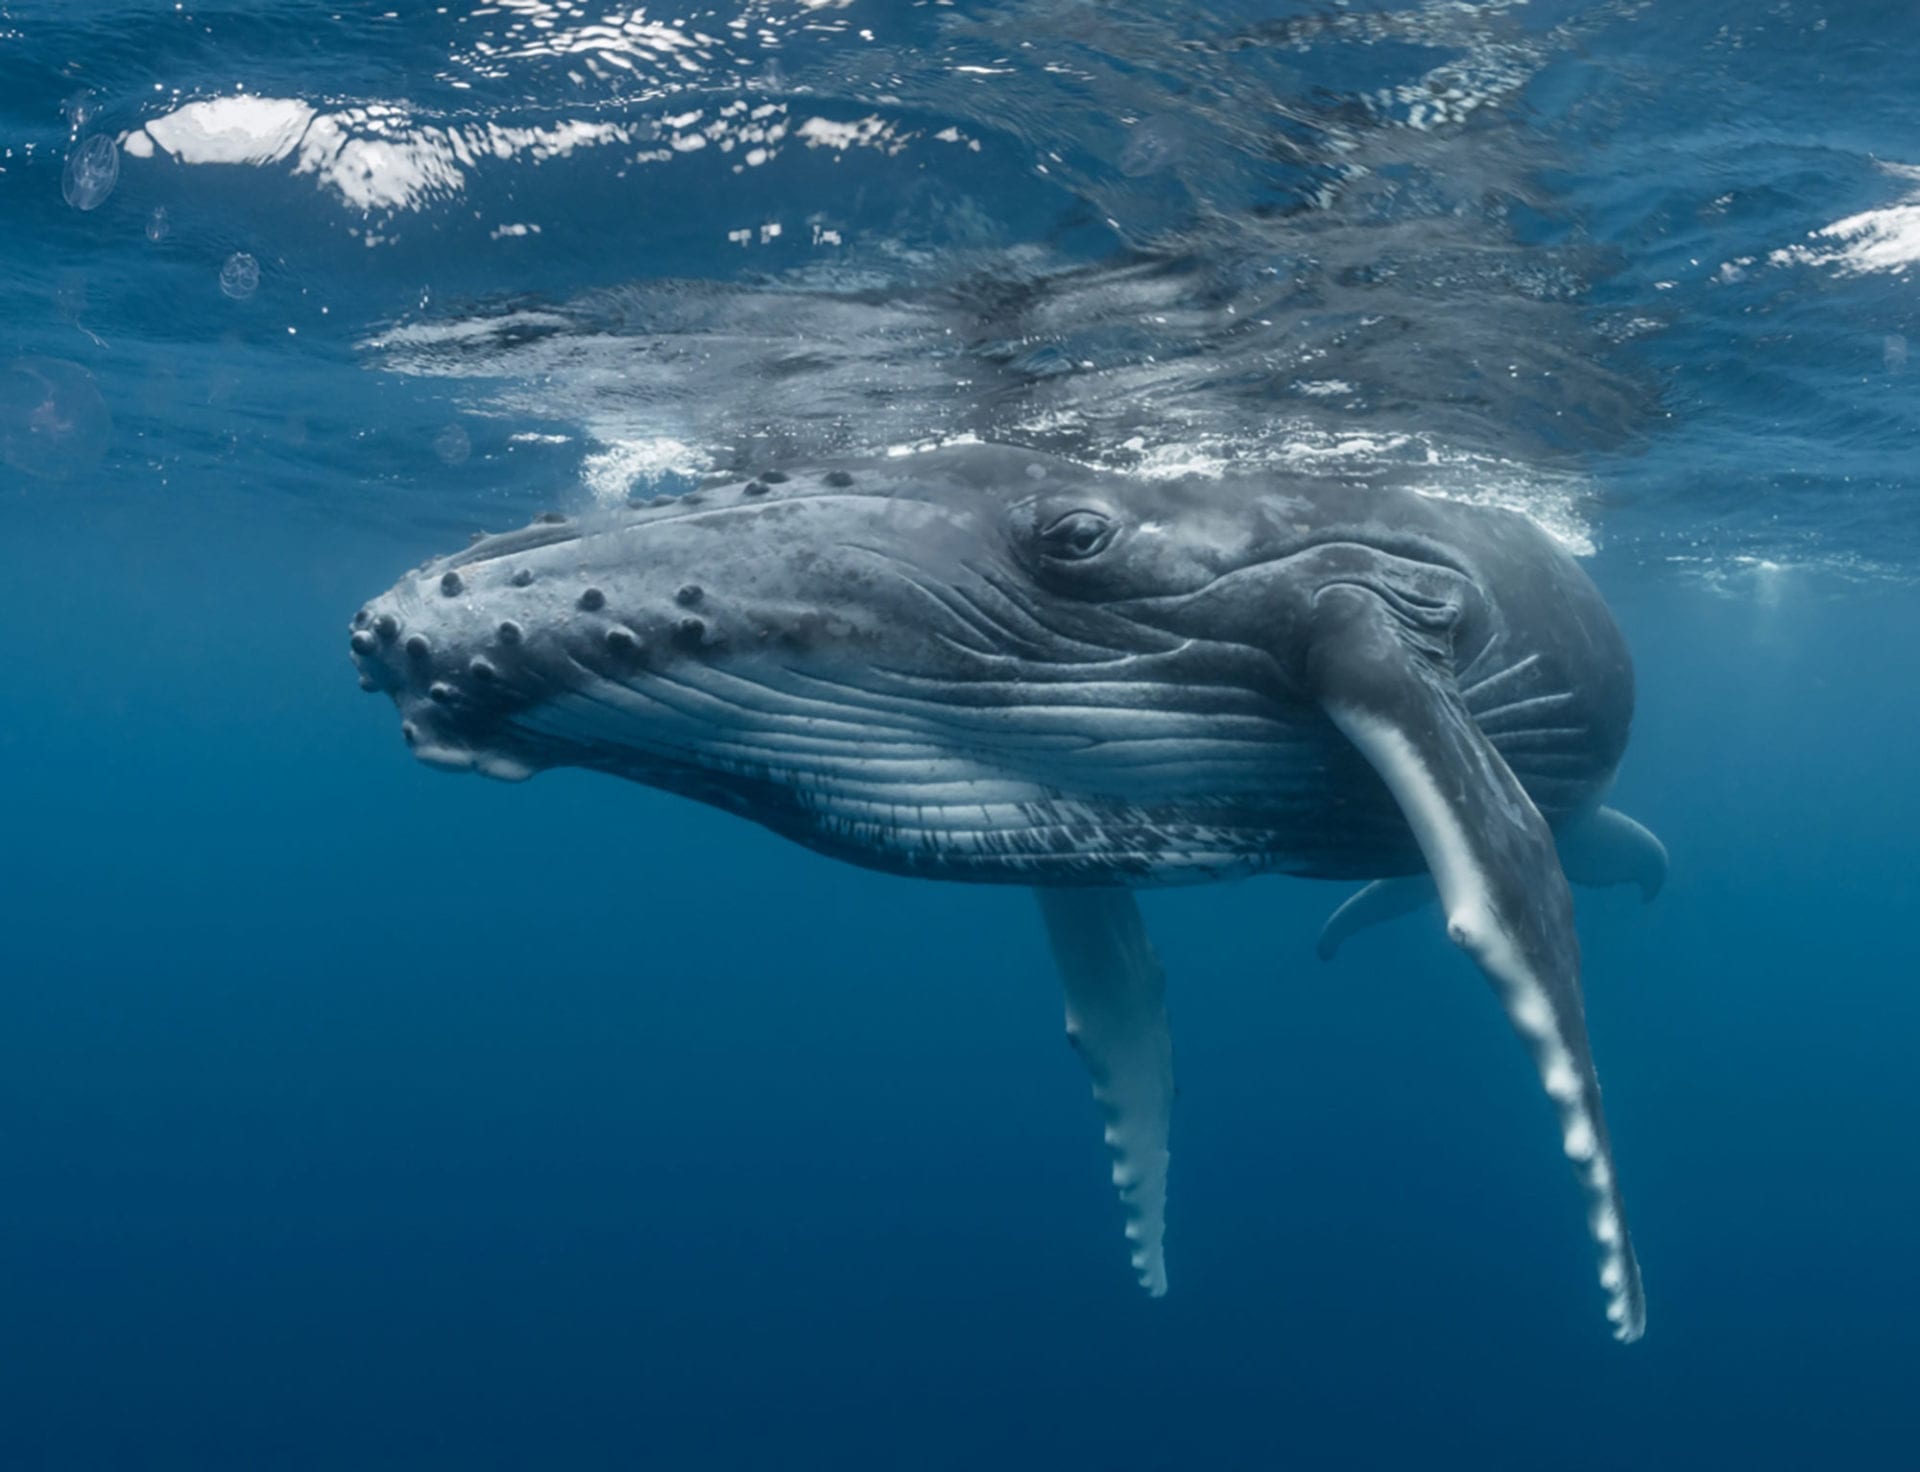 A humpback whale at the surface, viewed from underwater.